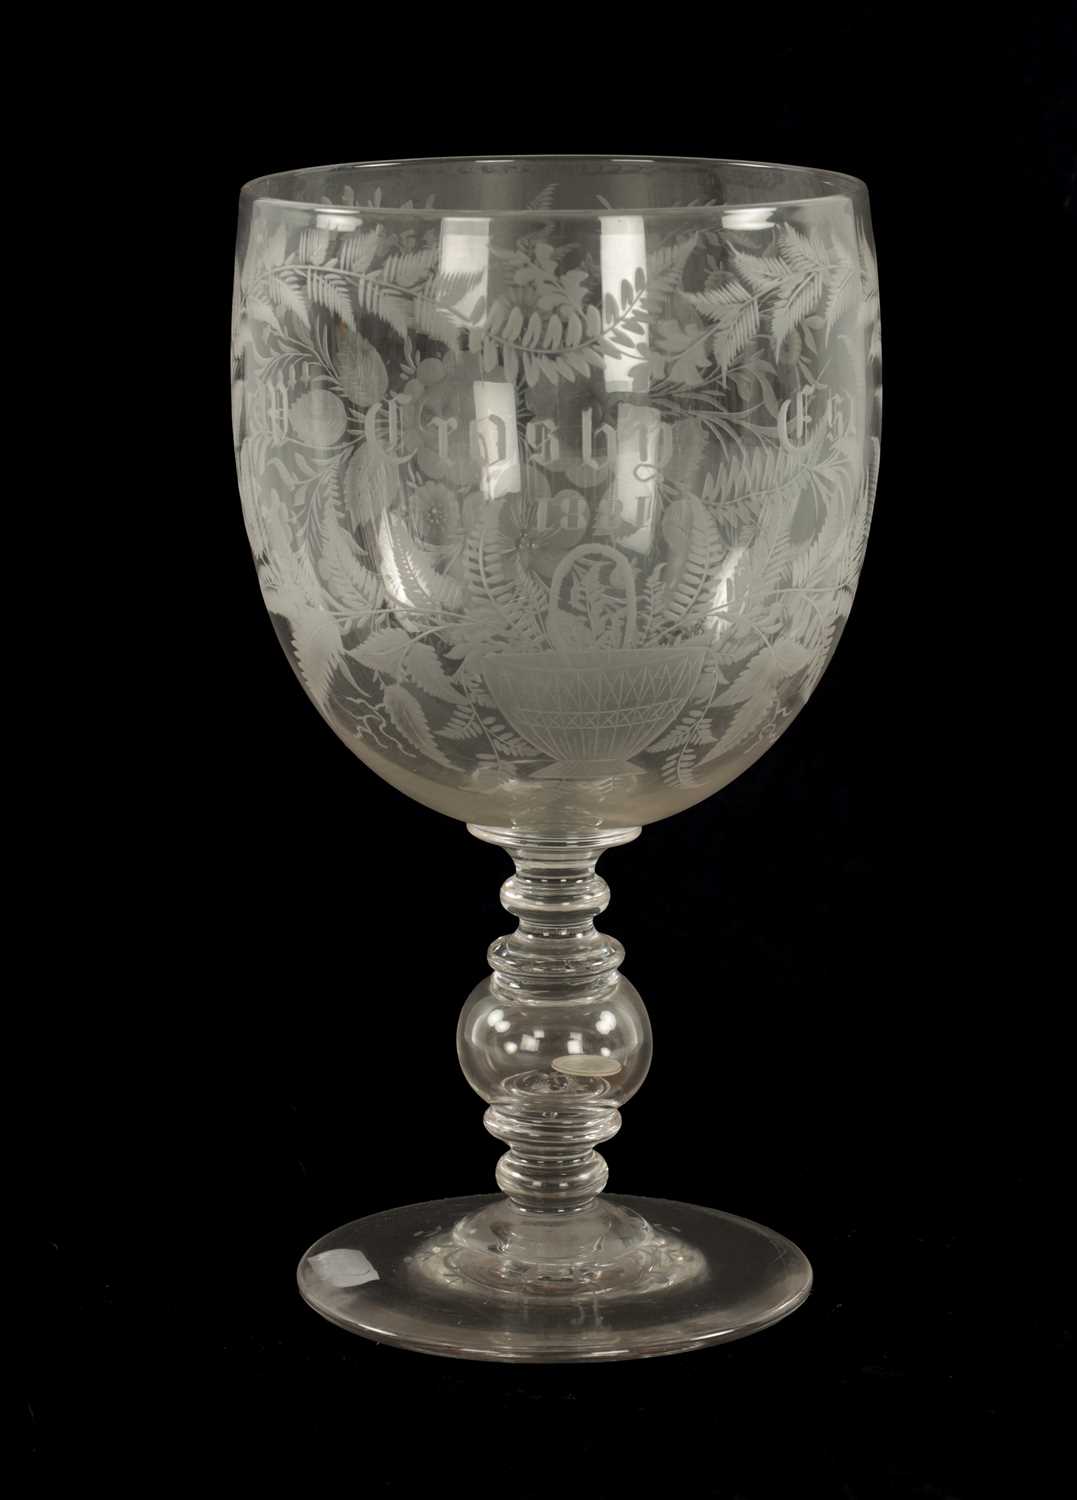 Lot 5 - AN OVERSIZED LATE 19TH CENTURY ENGRAVED GLASS COIN GOBLET